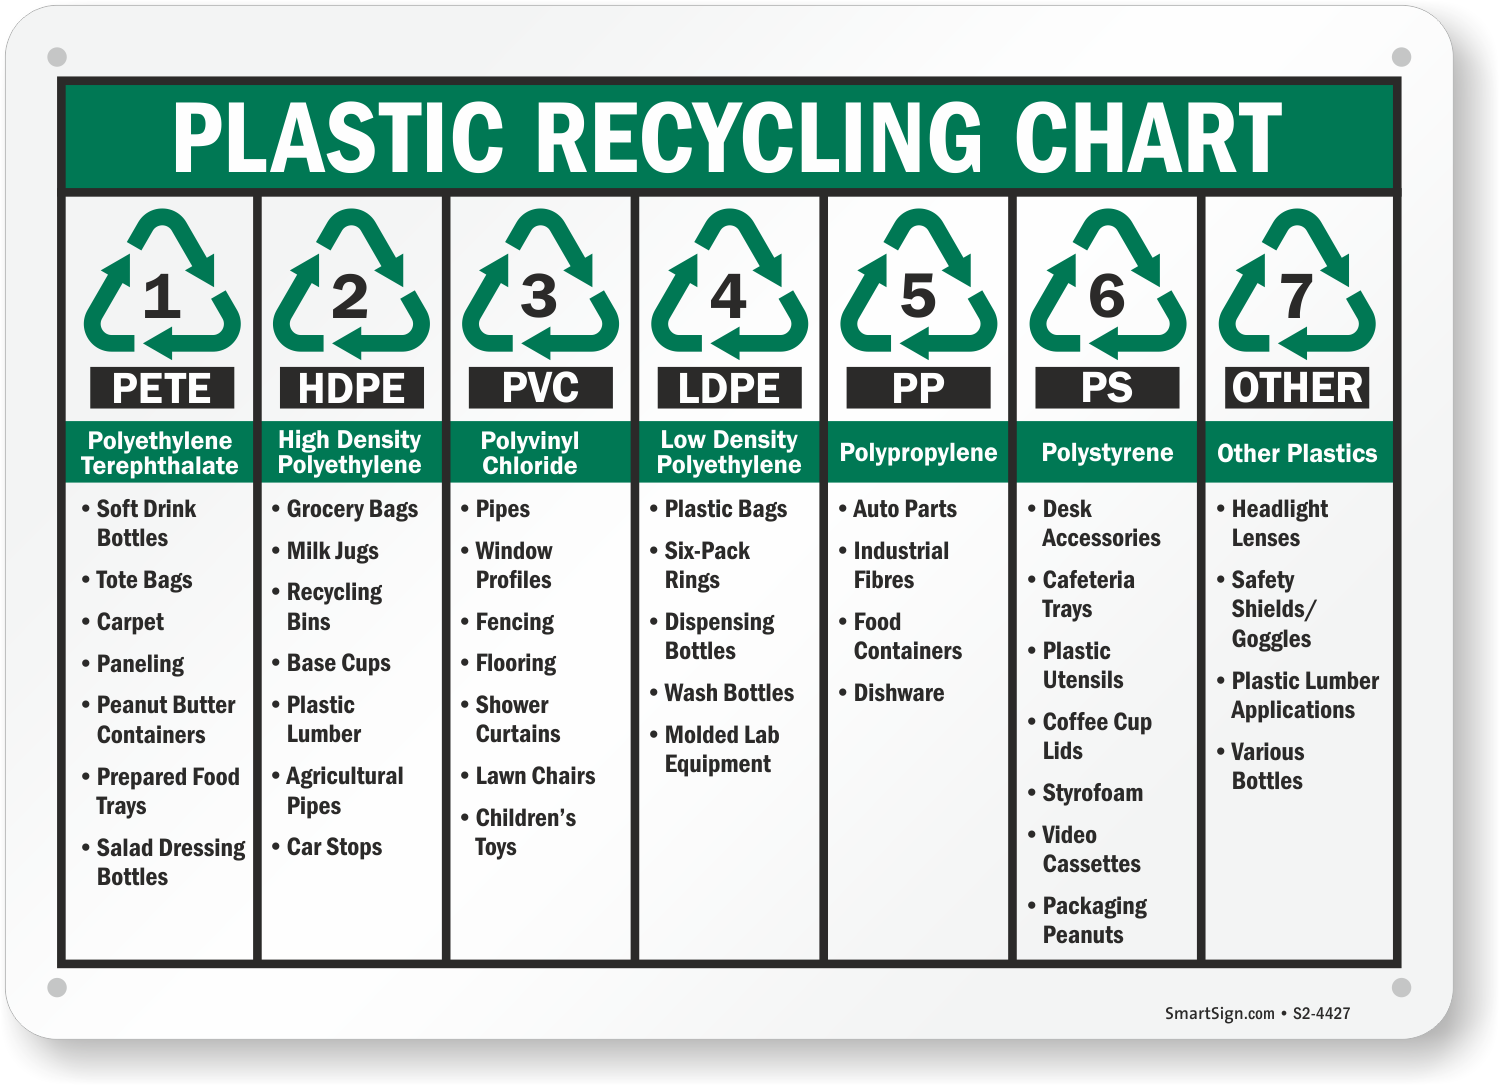 Plastic Recycling Chart Sign S24427 from SKU